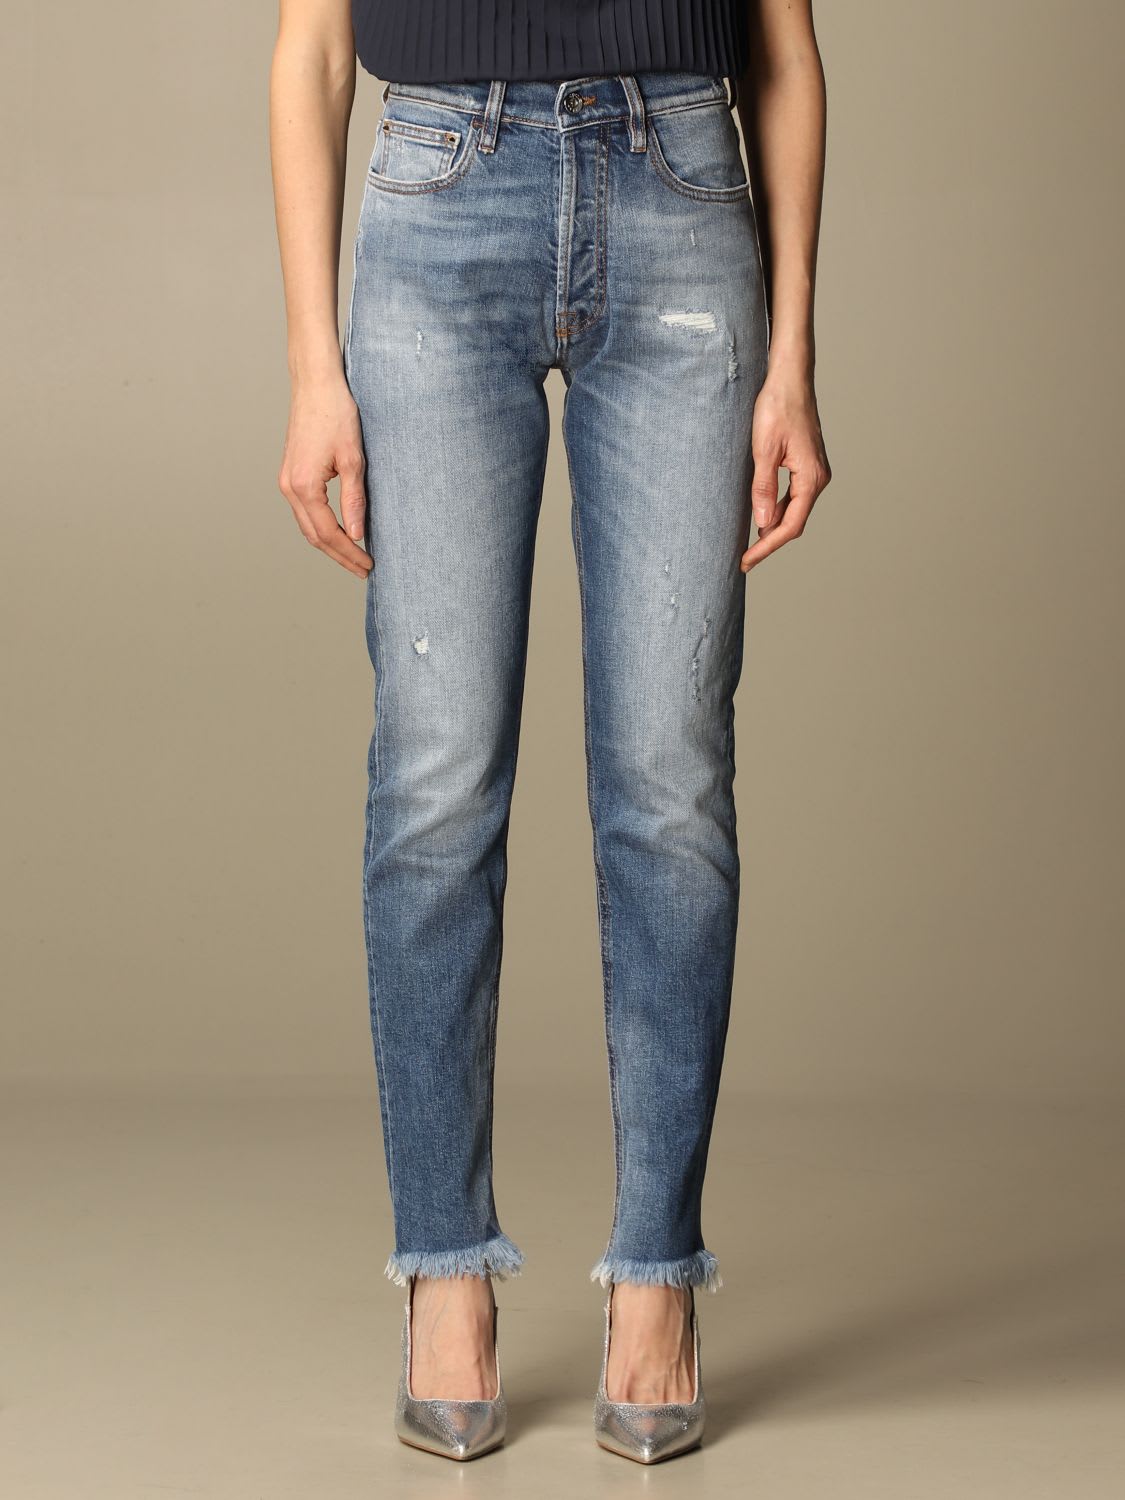 CYCLE JEANS CYCLE SKINNY JEANS IN DENIM WITH RIPS,P531215 D100 07